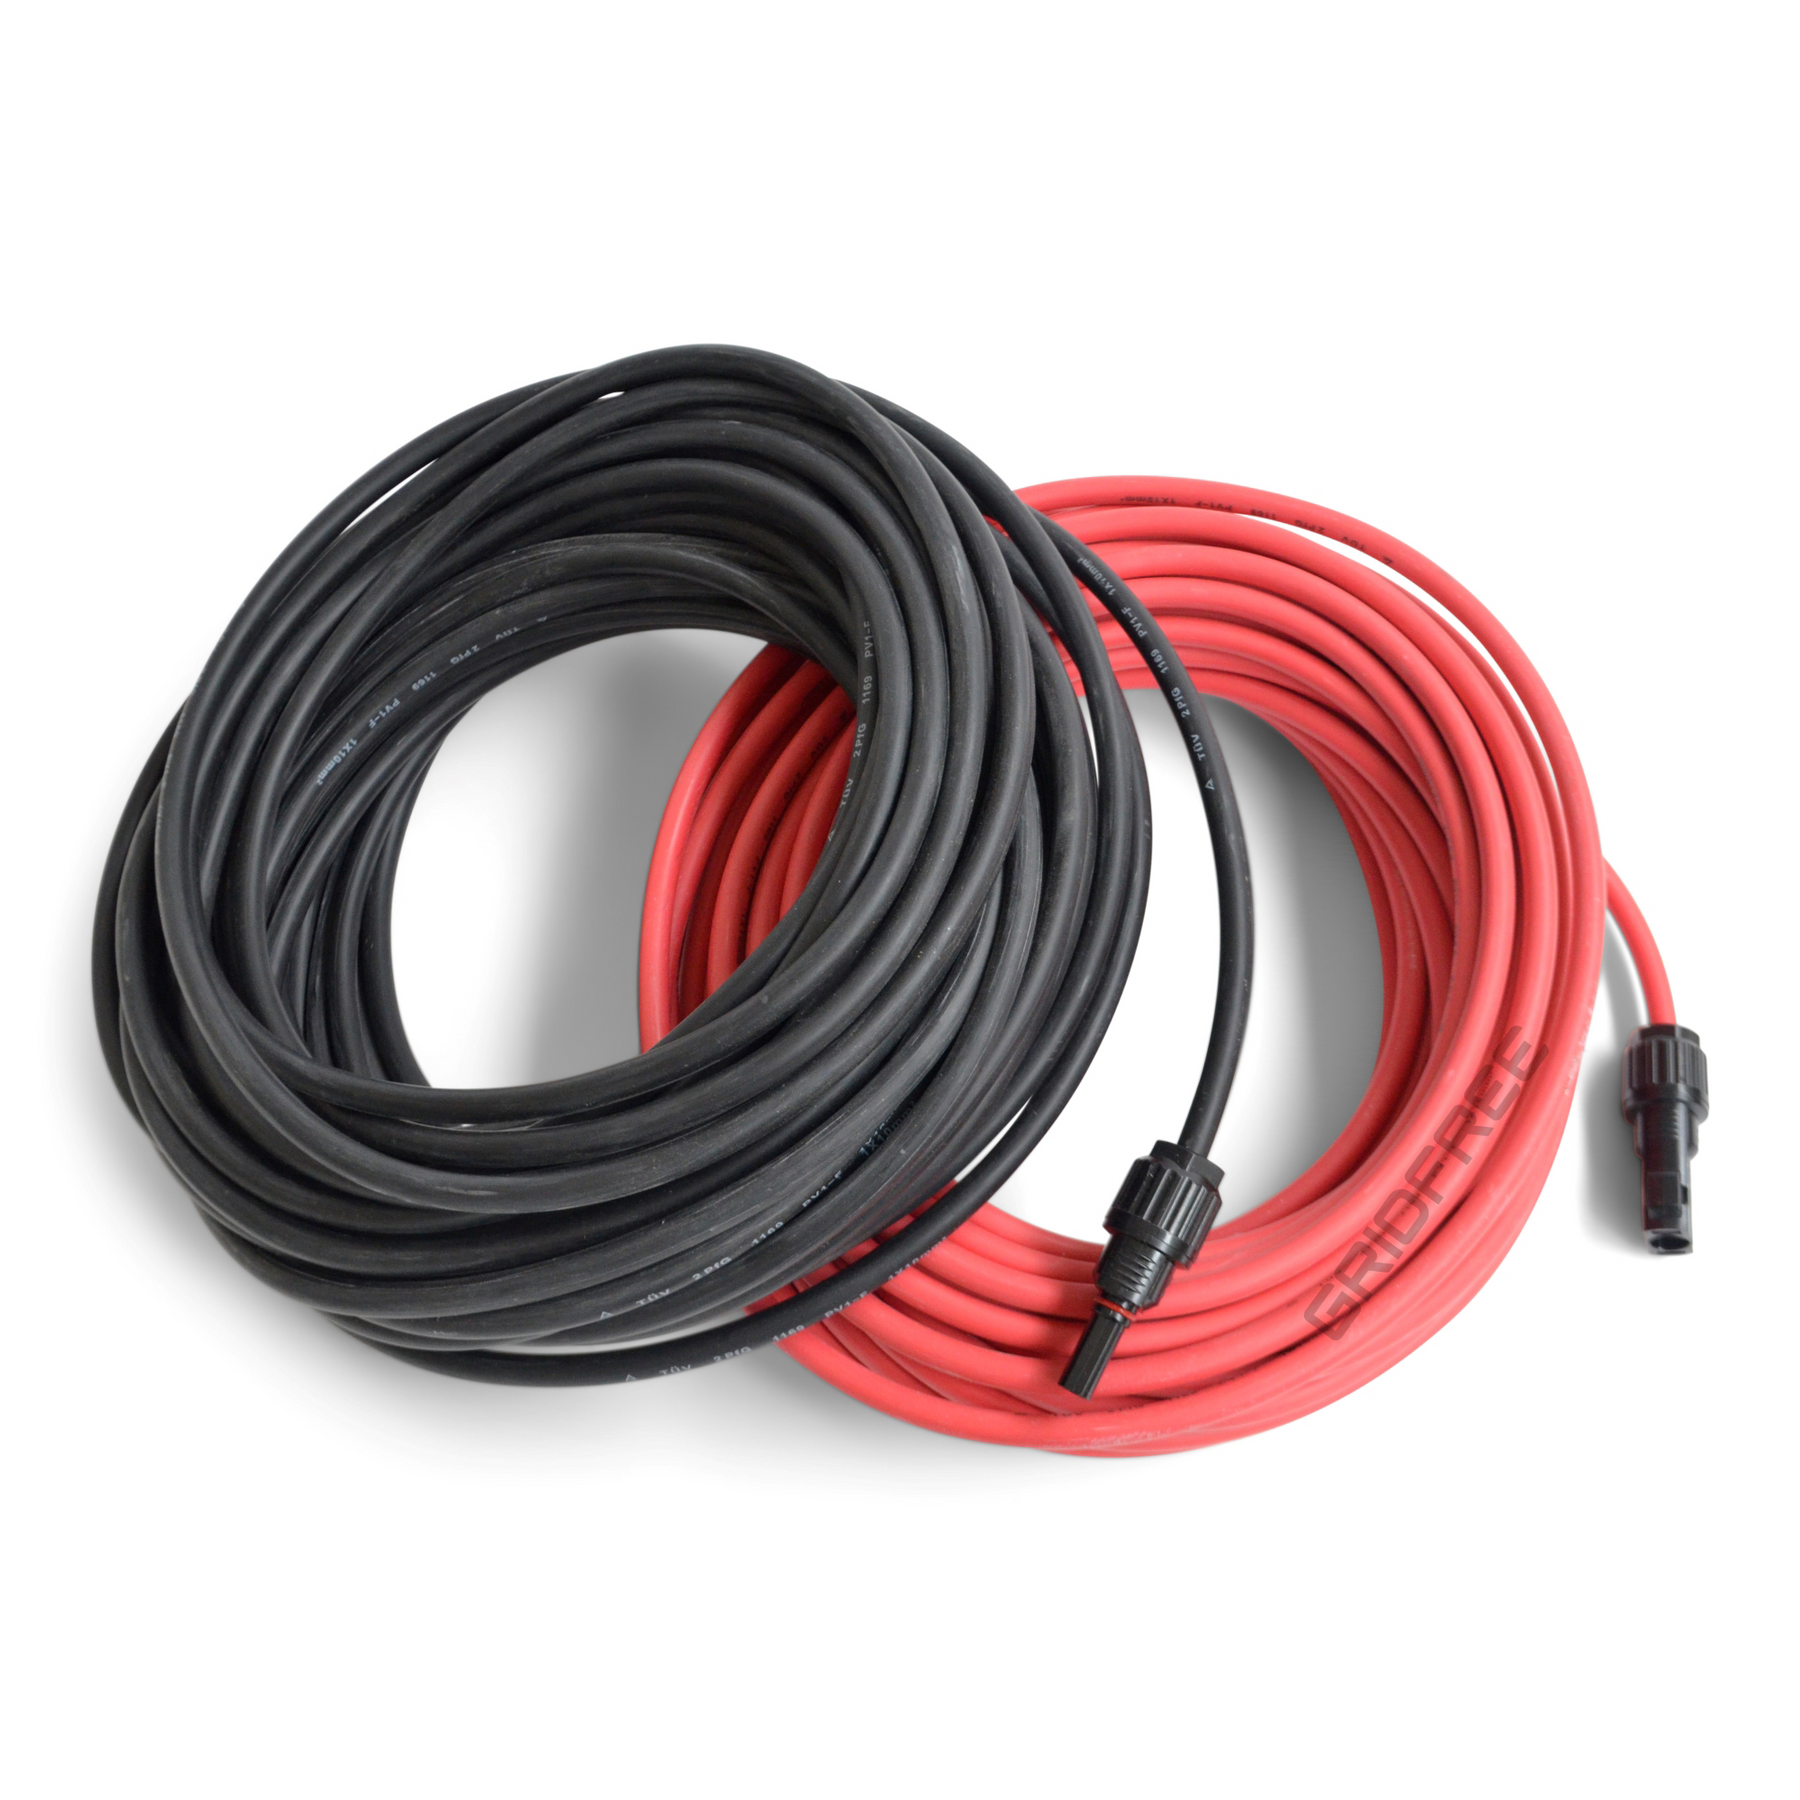 Black And Red 3 Metres / 10 Feet 4mm2 Solar Panel Cable Extension